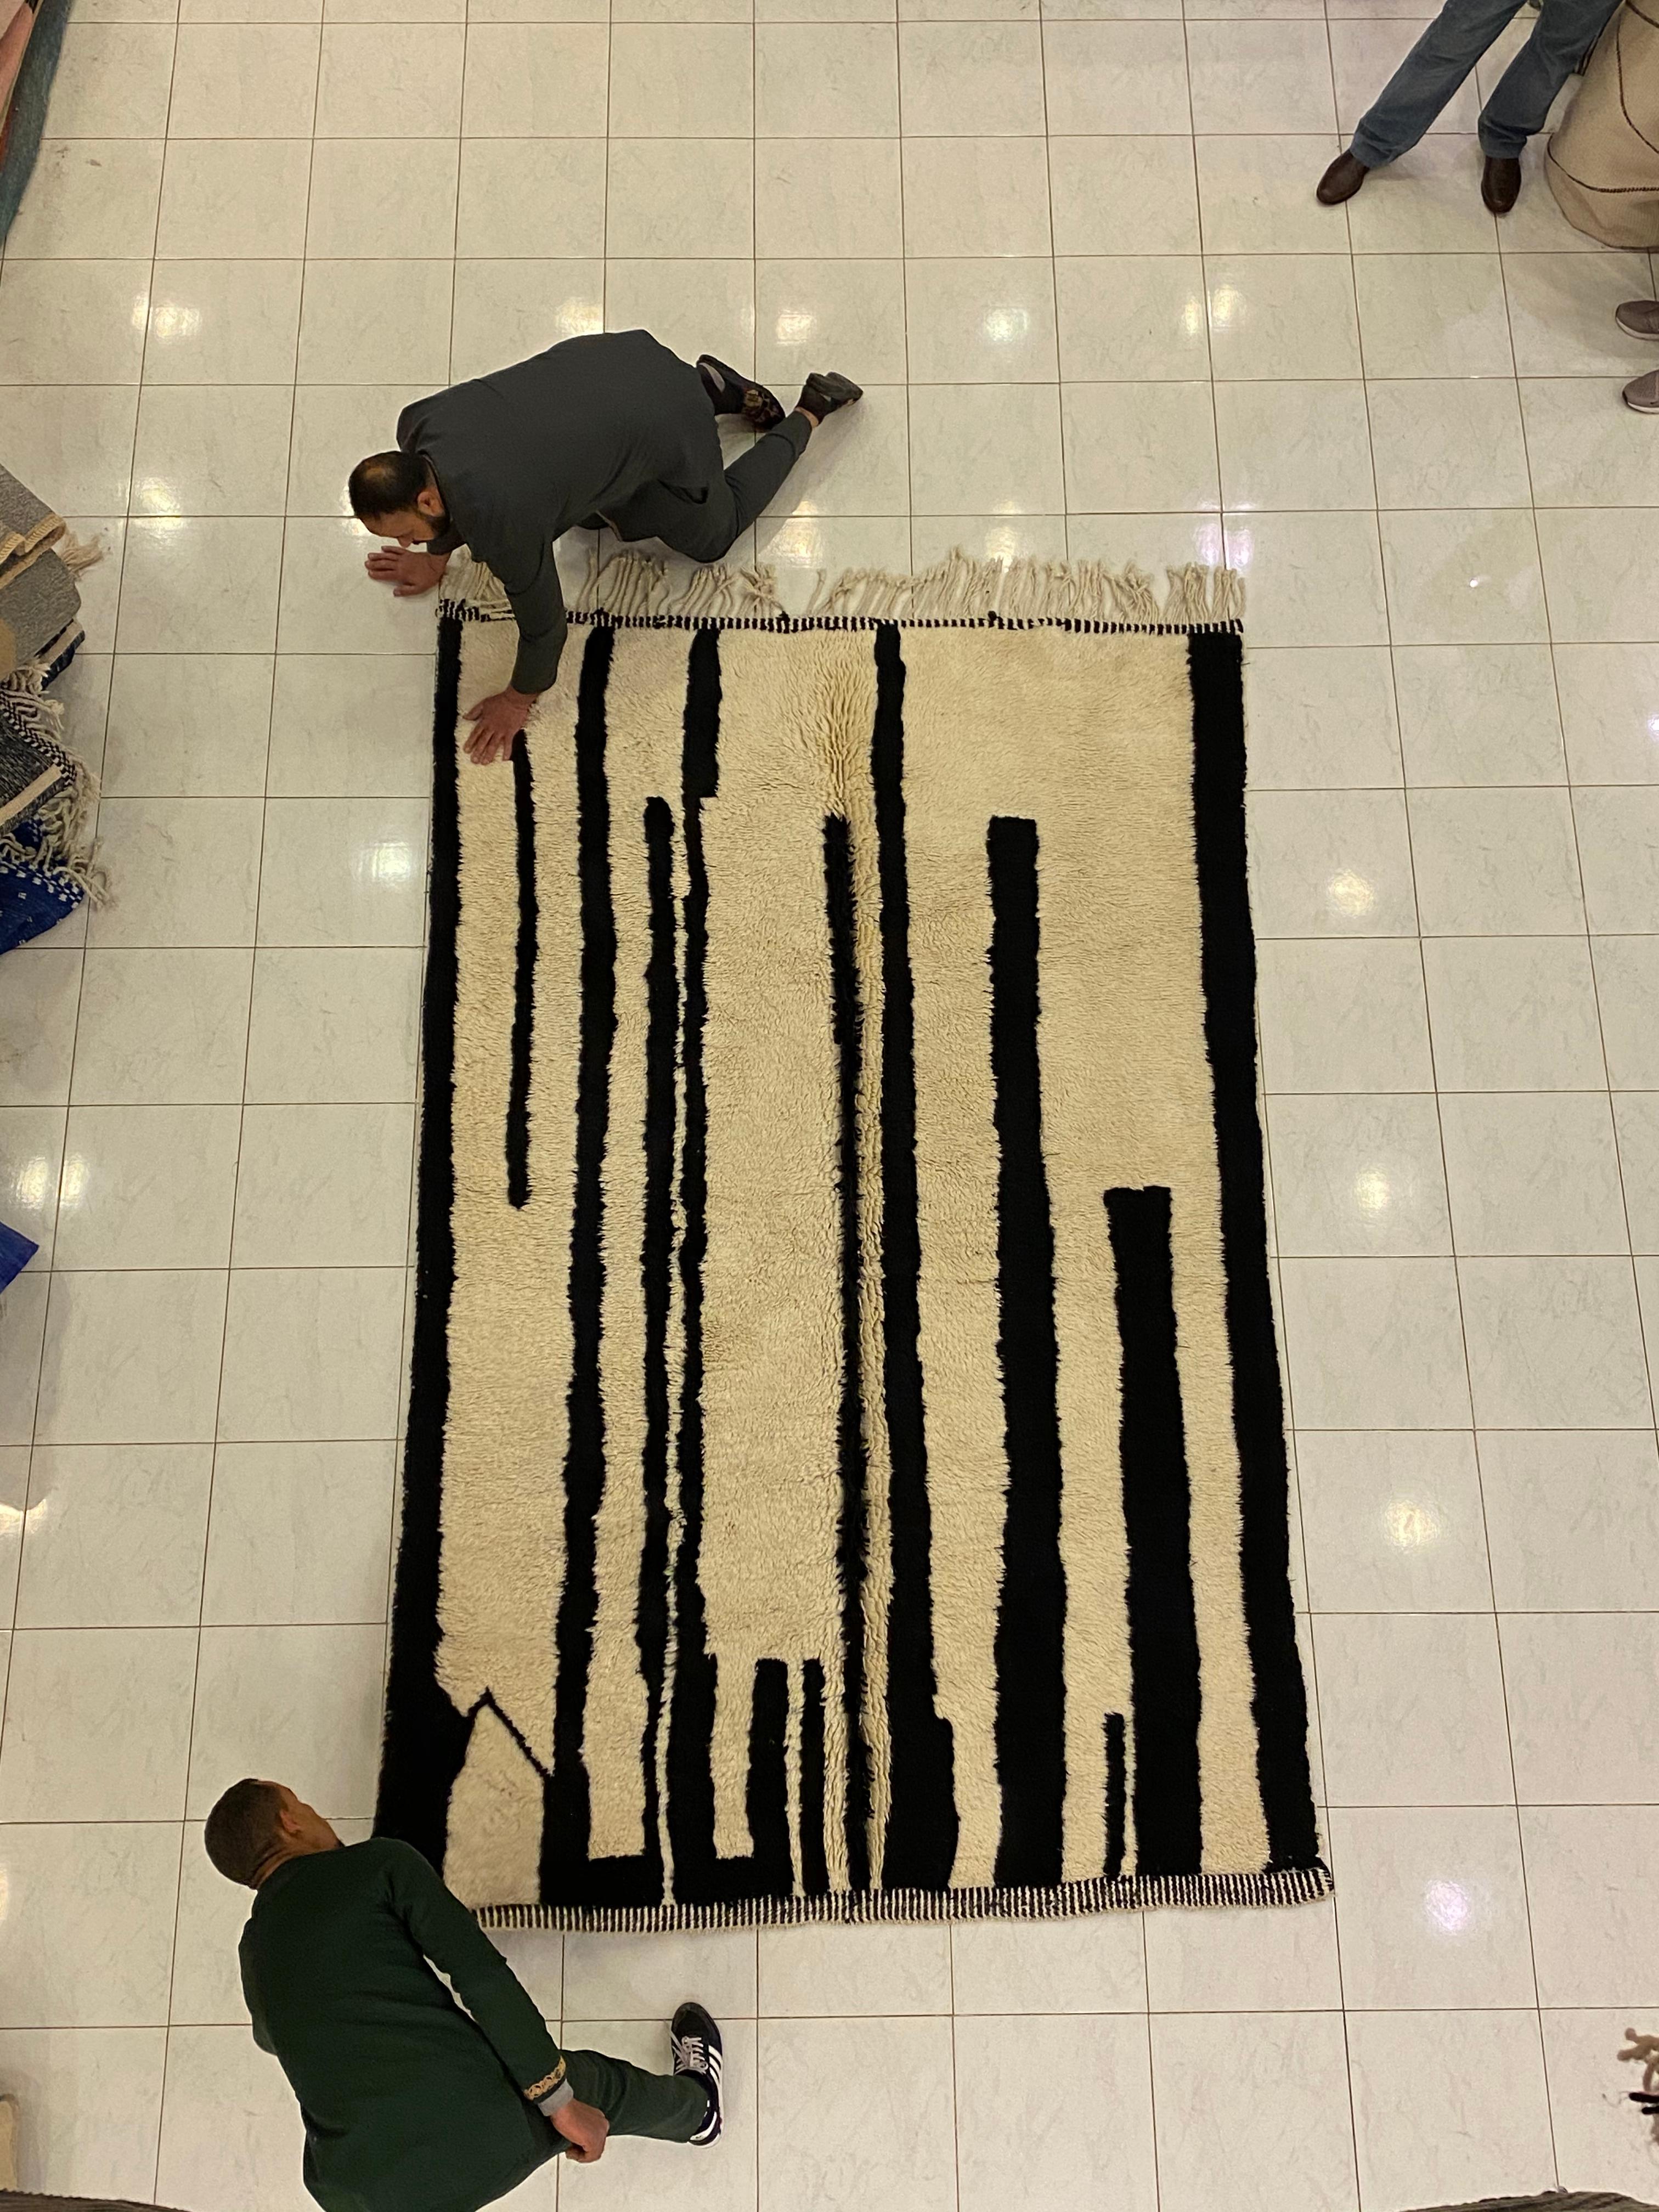 ca. Contemporary   Wool   
Moroccan rugs are a handmade creation, woven by the women of Berber tribes in the Atlas mountains. Each kind of berber rug is characterized by specific shapes and motifs that refer to the Beliefs of tribal population.
The